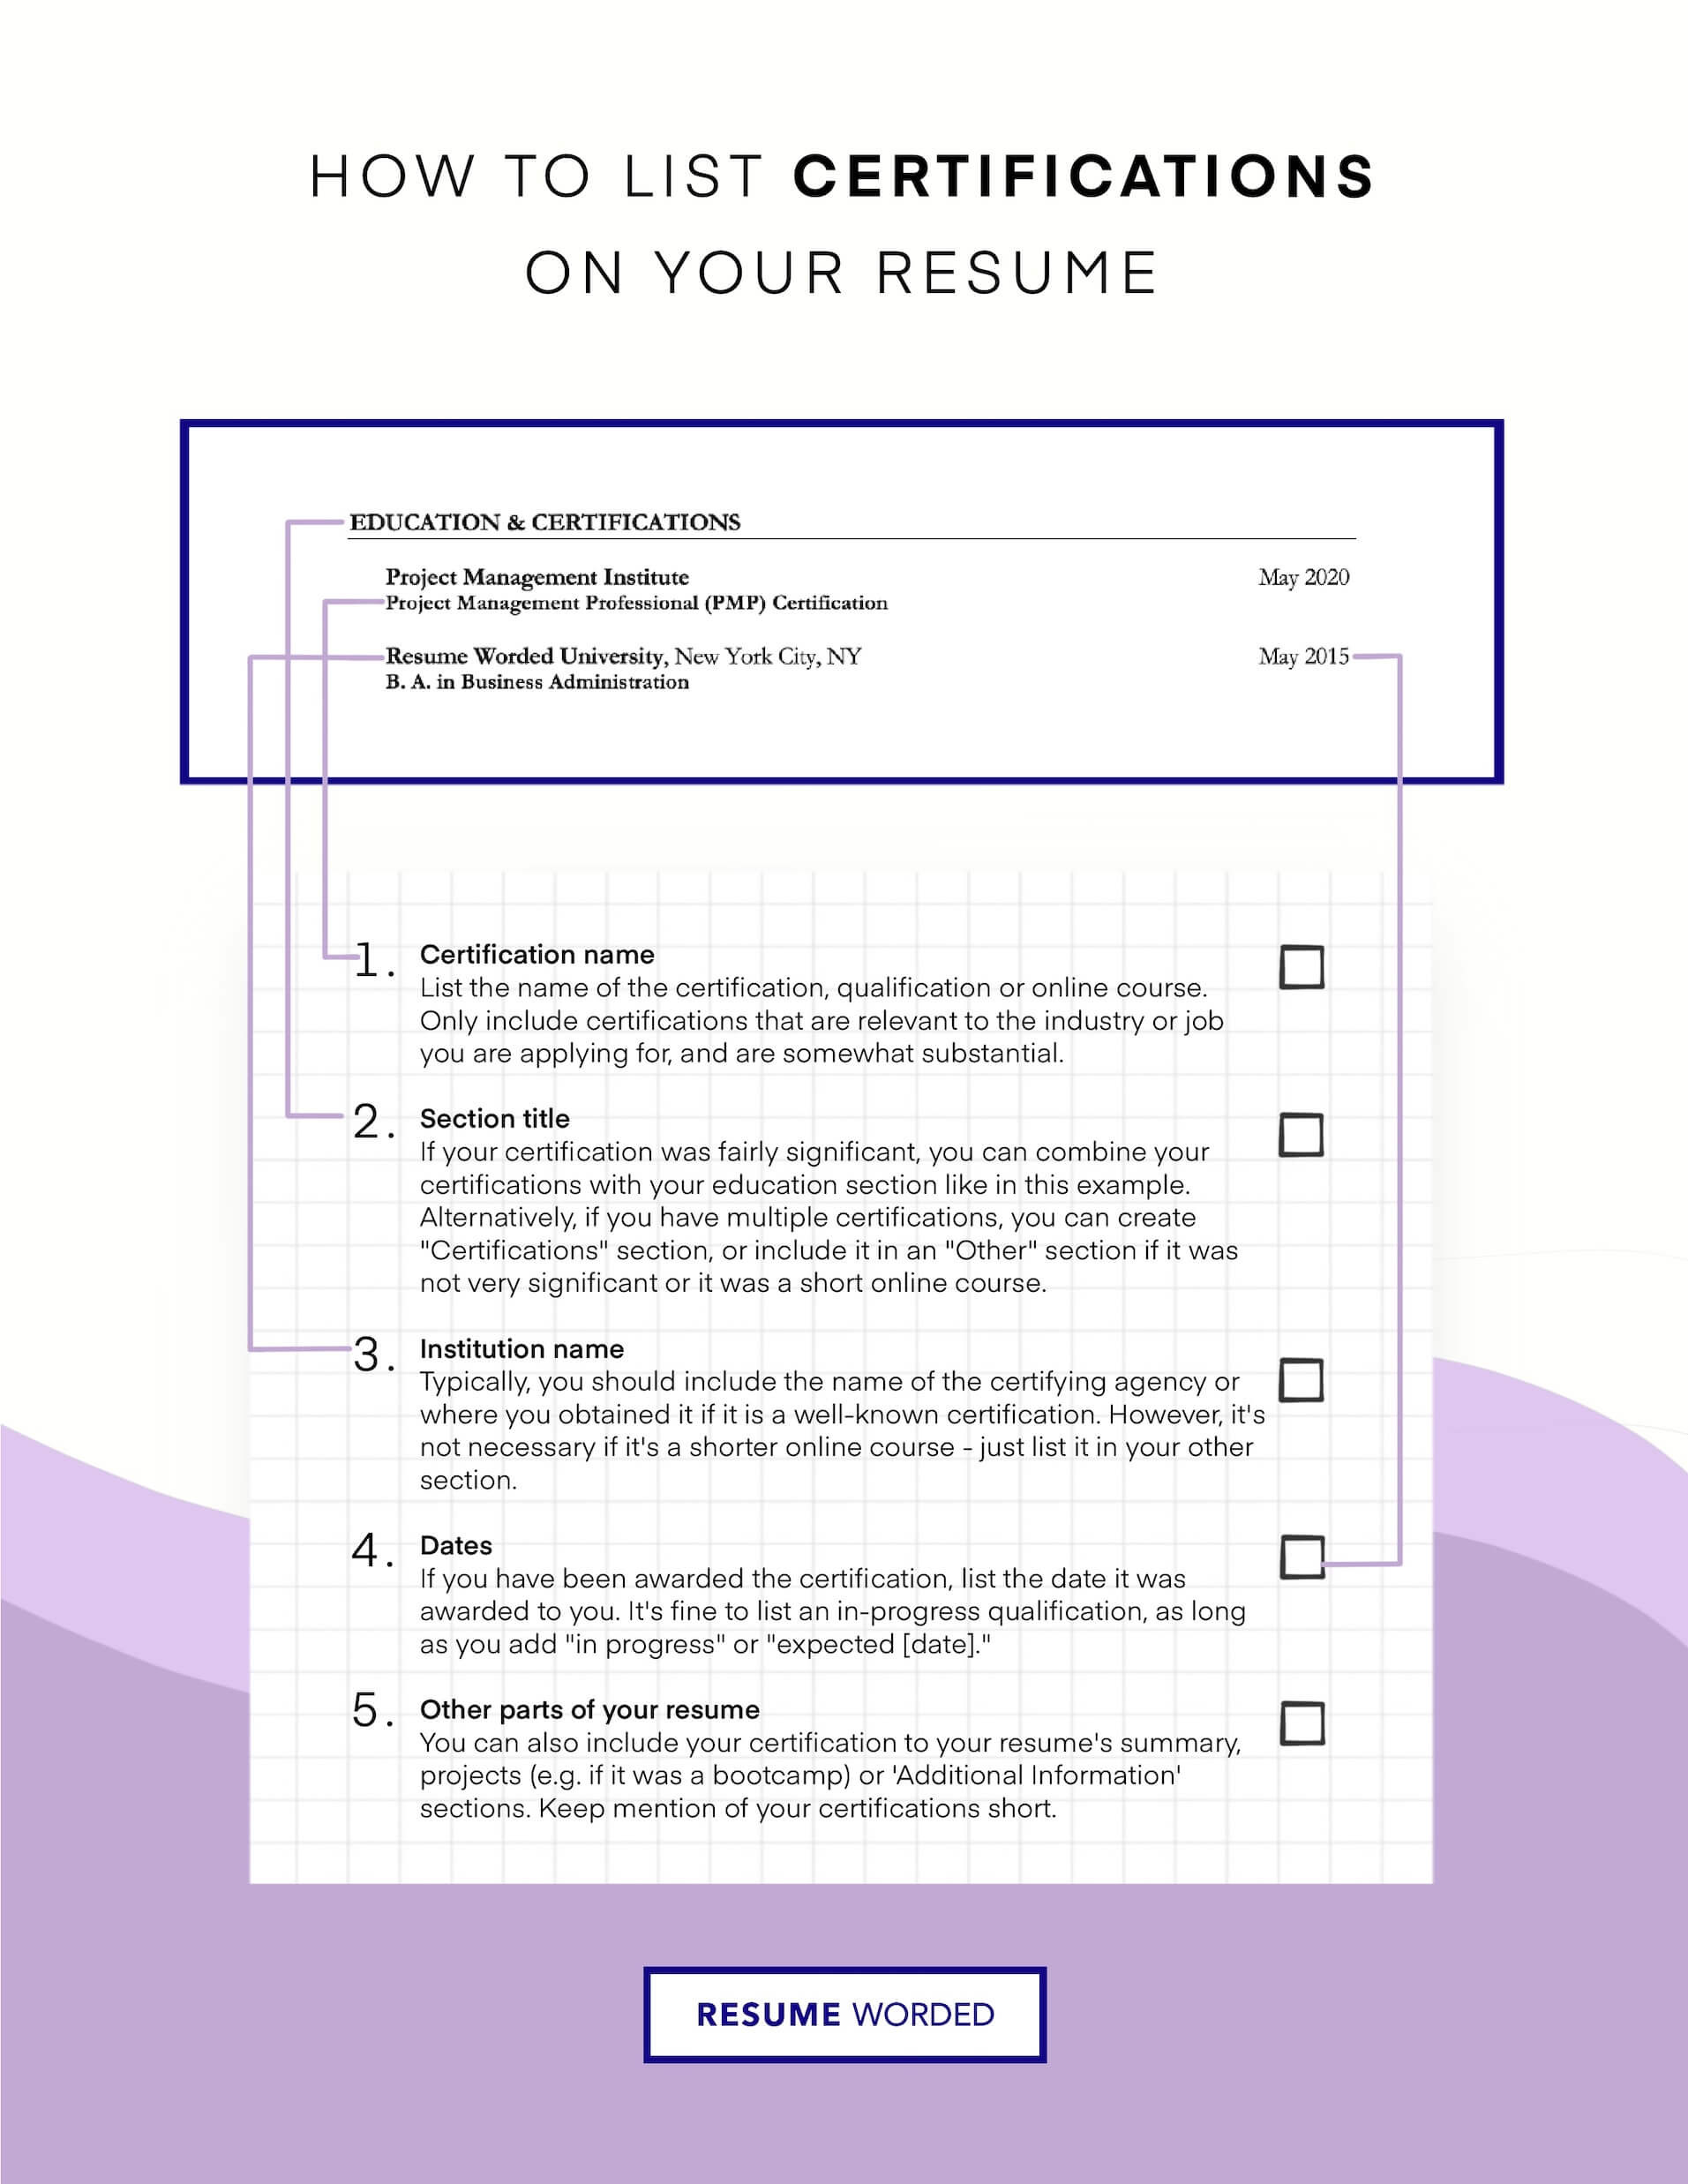 Oracle E Business Suite Sample Resume 3 oracle Resume Examples for 2022 Resume Worded